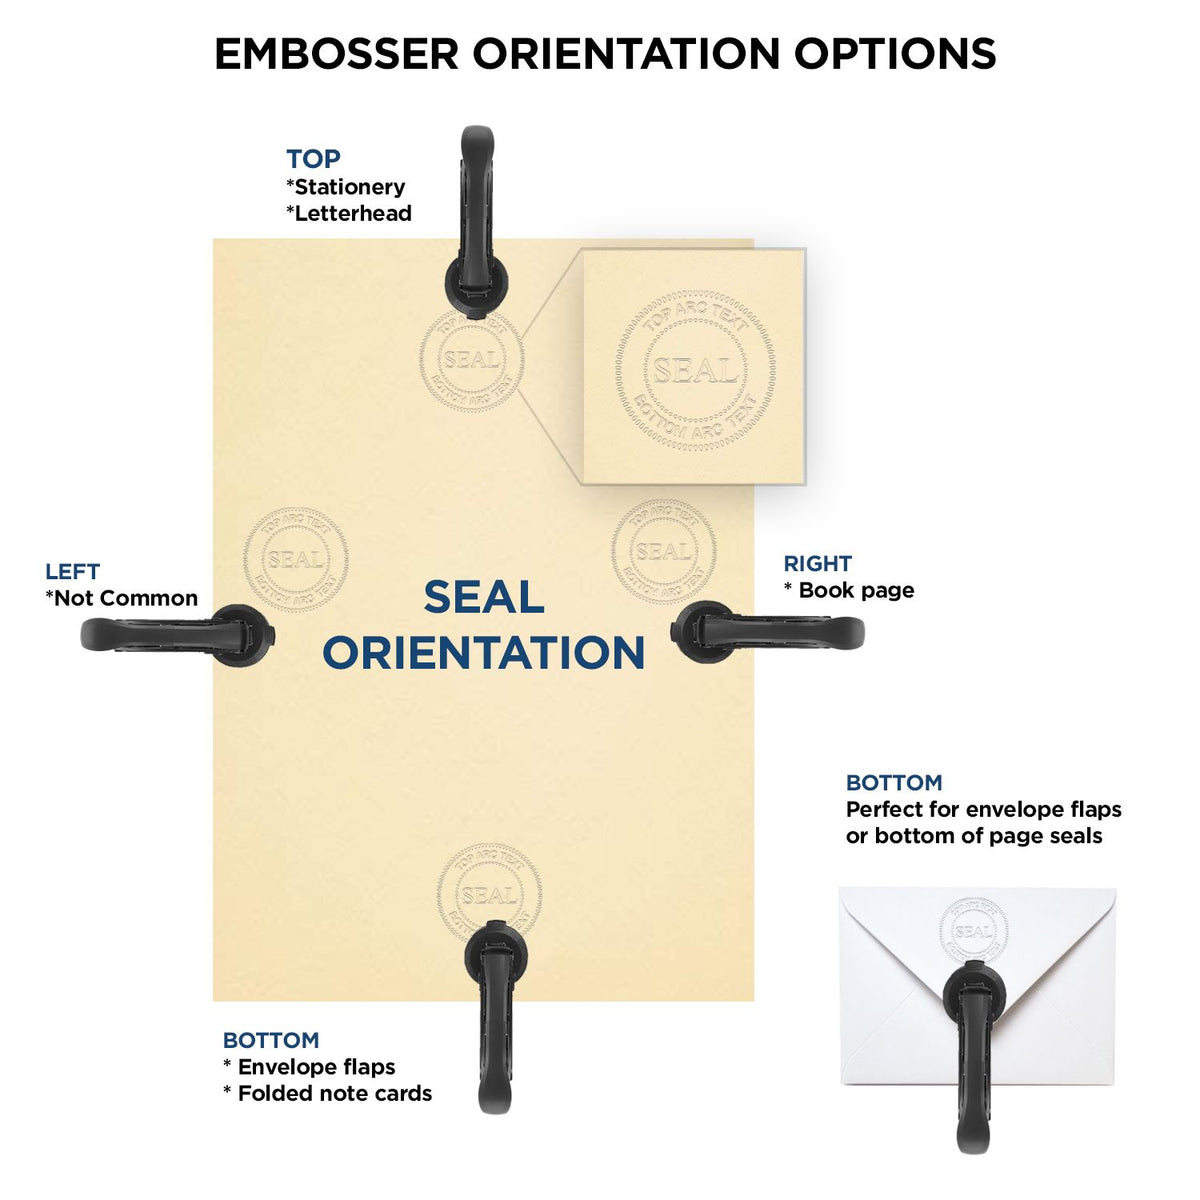 An infographic for the Handheld Connecticut Professional Engineer Embosser showing embosser orientation, this is showing examples of a top, bottom, right and left insert.